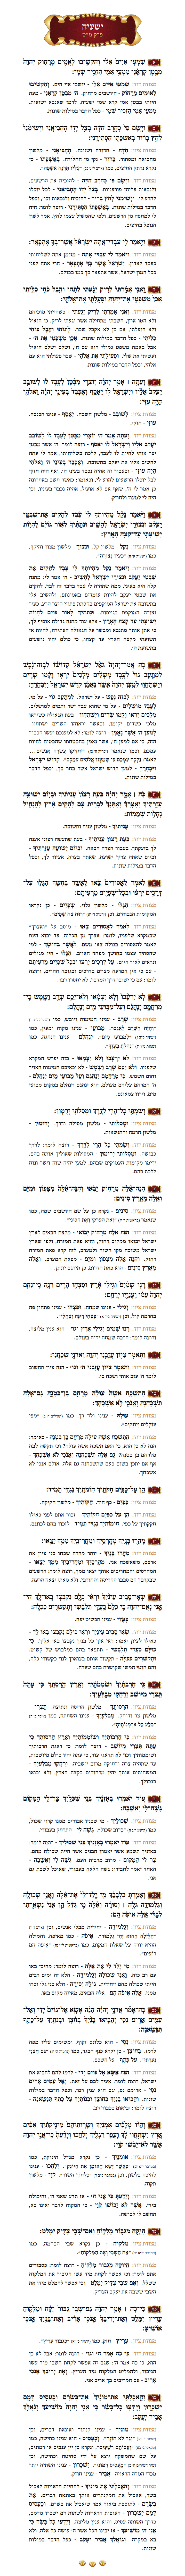 Sefer Yeshayohu Chapter 49 with commentary